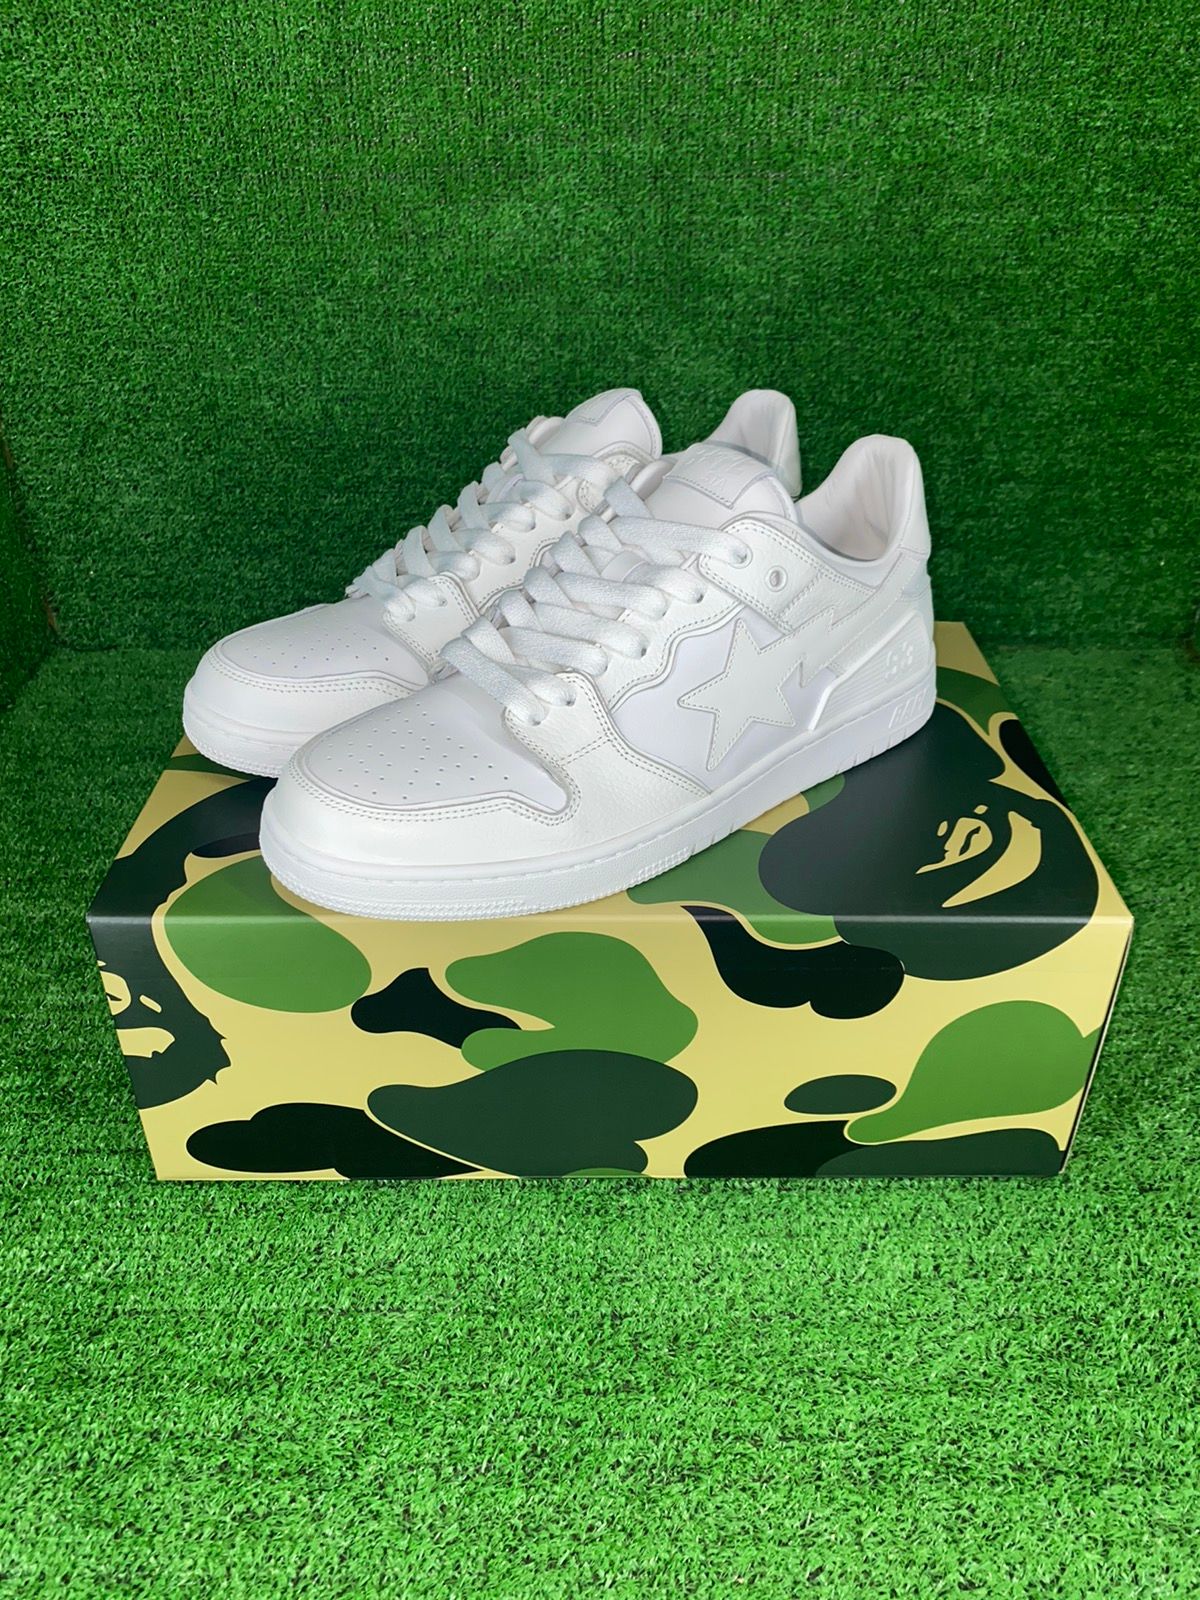 Pre-owned Bape Sk8 Sta 3 White Size 10 Shoes